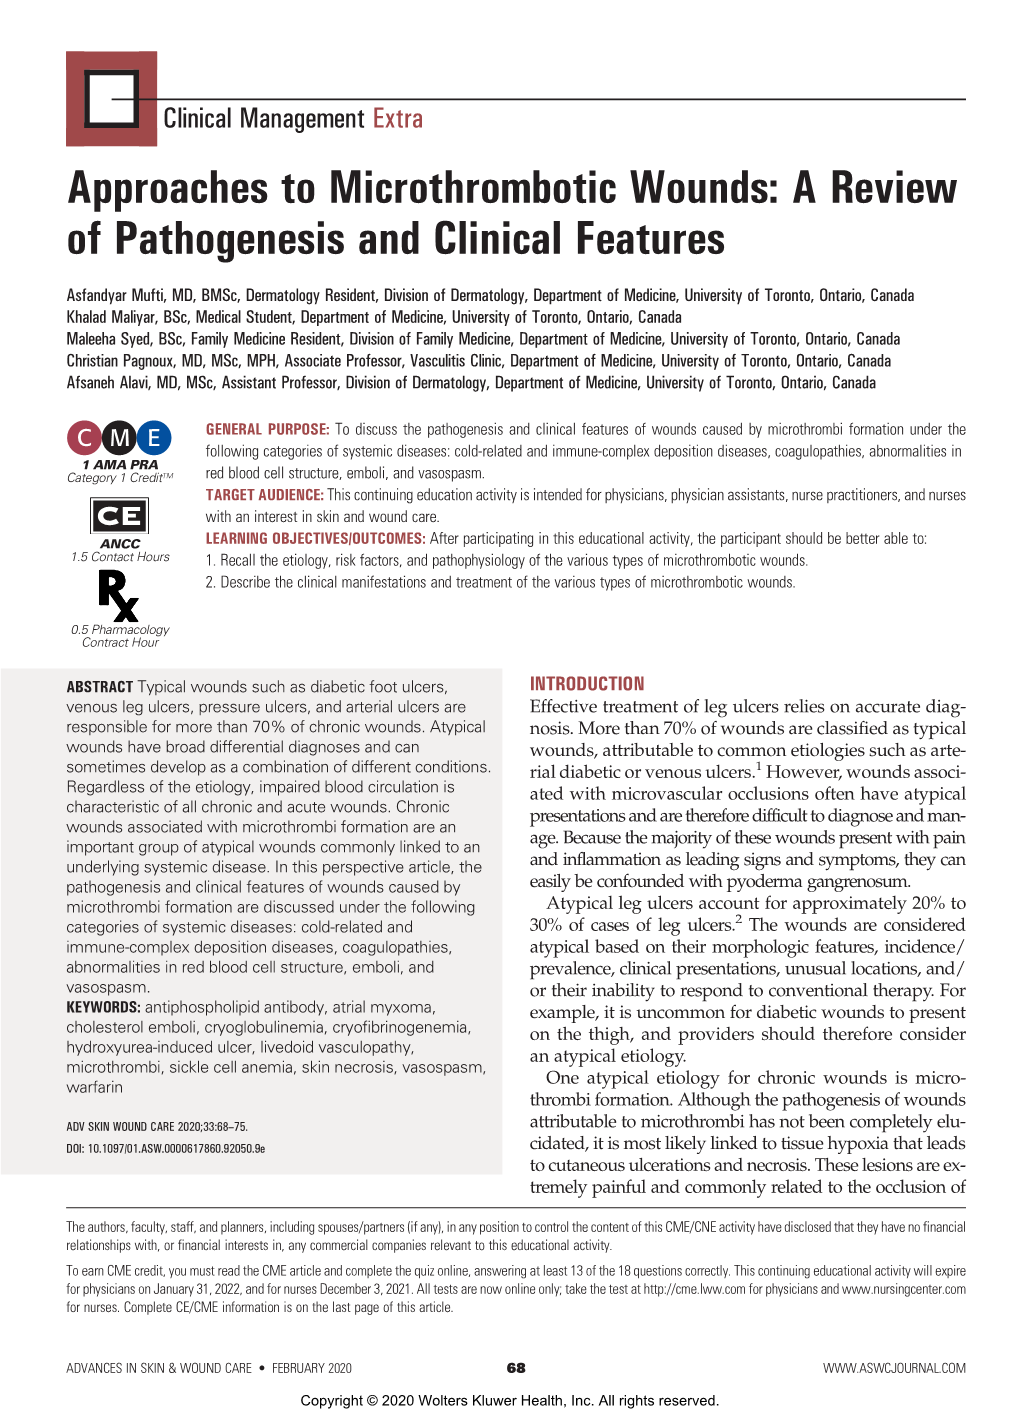 Approaches to Microthrombotic Wounds: a Review of Pathogenesis and Clinical Features